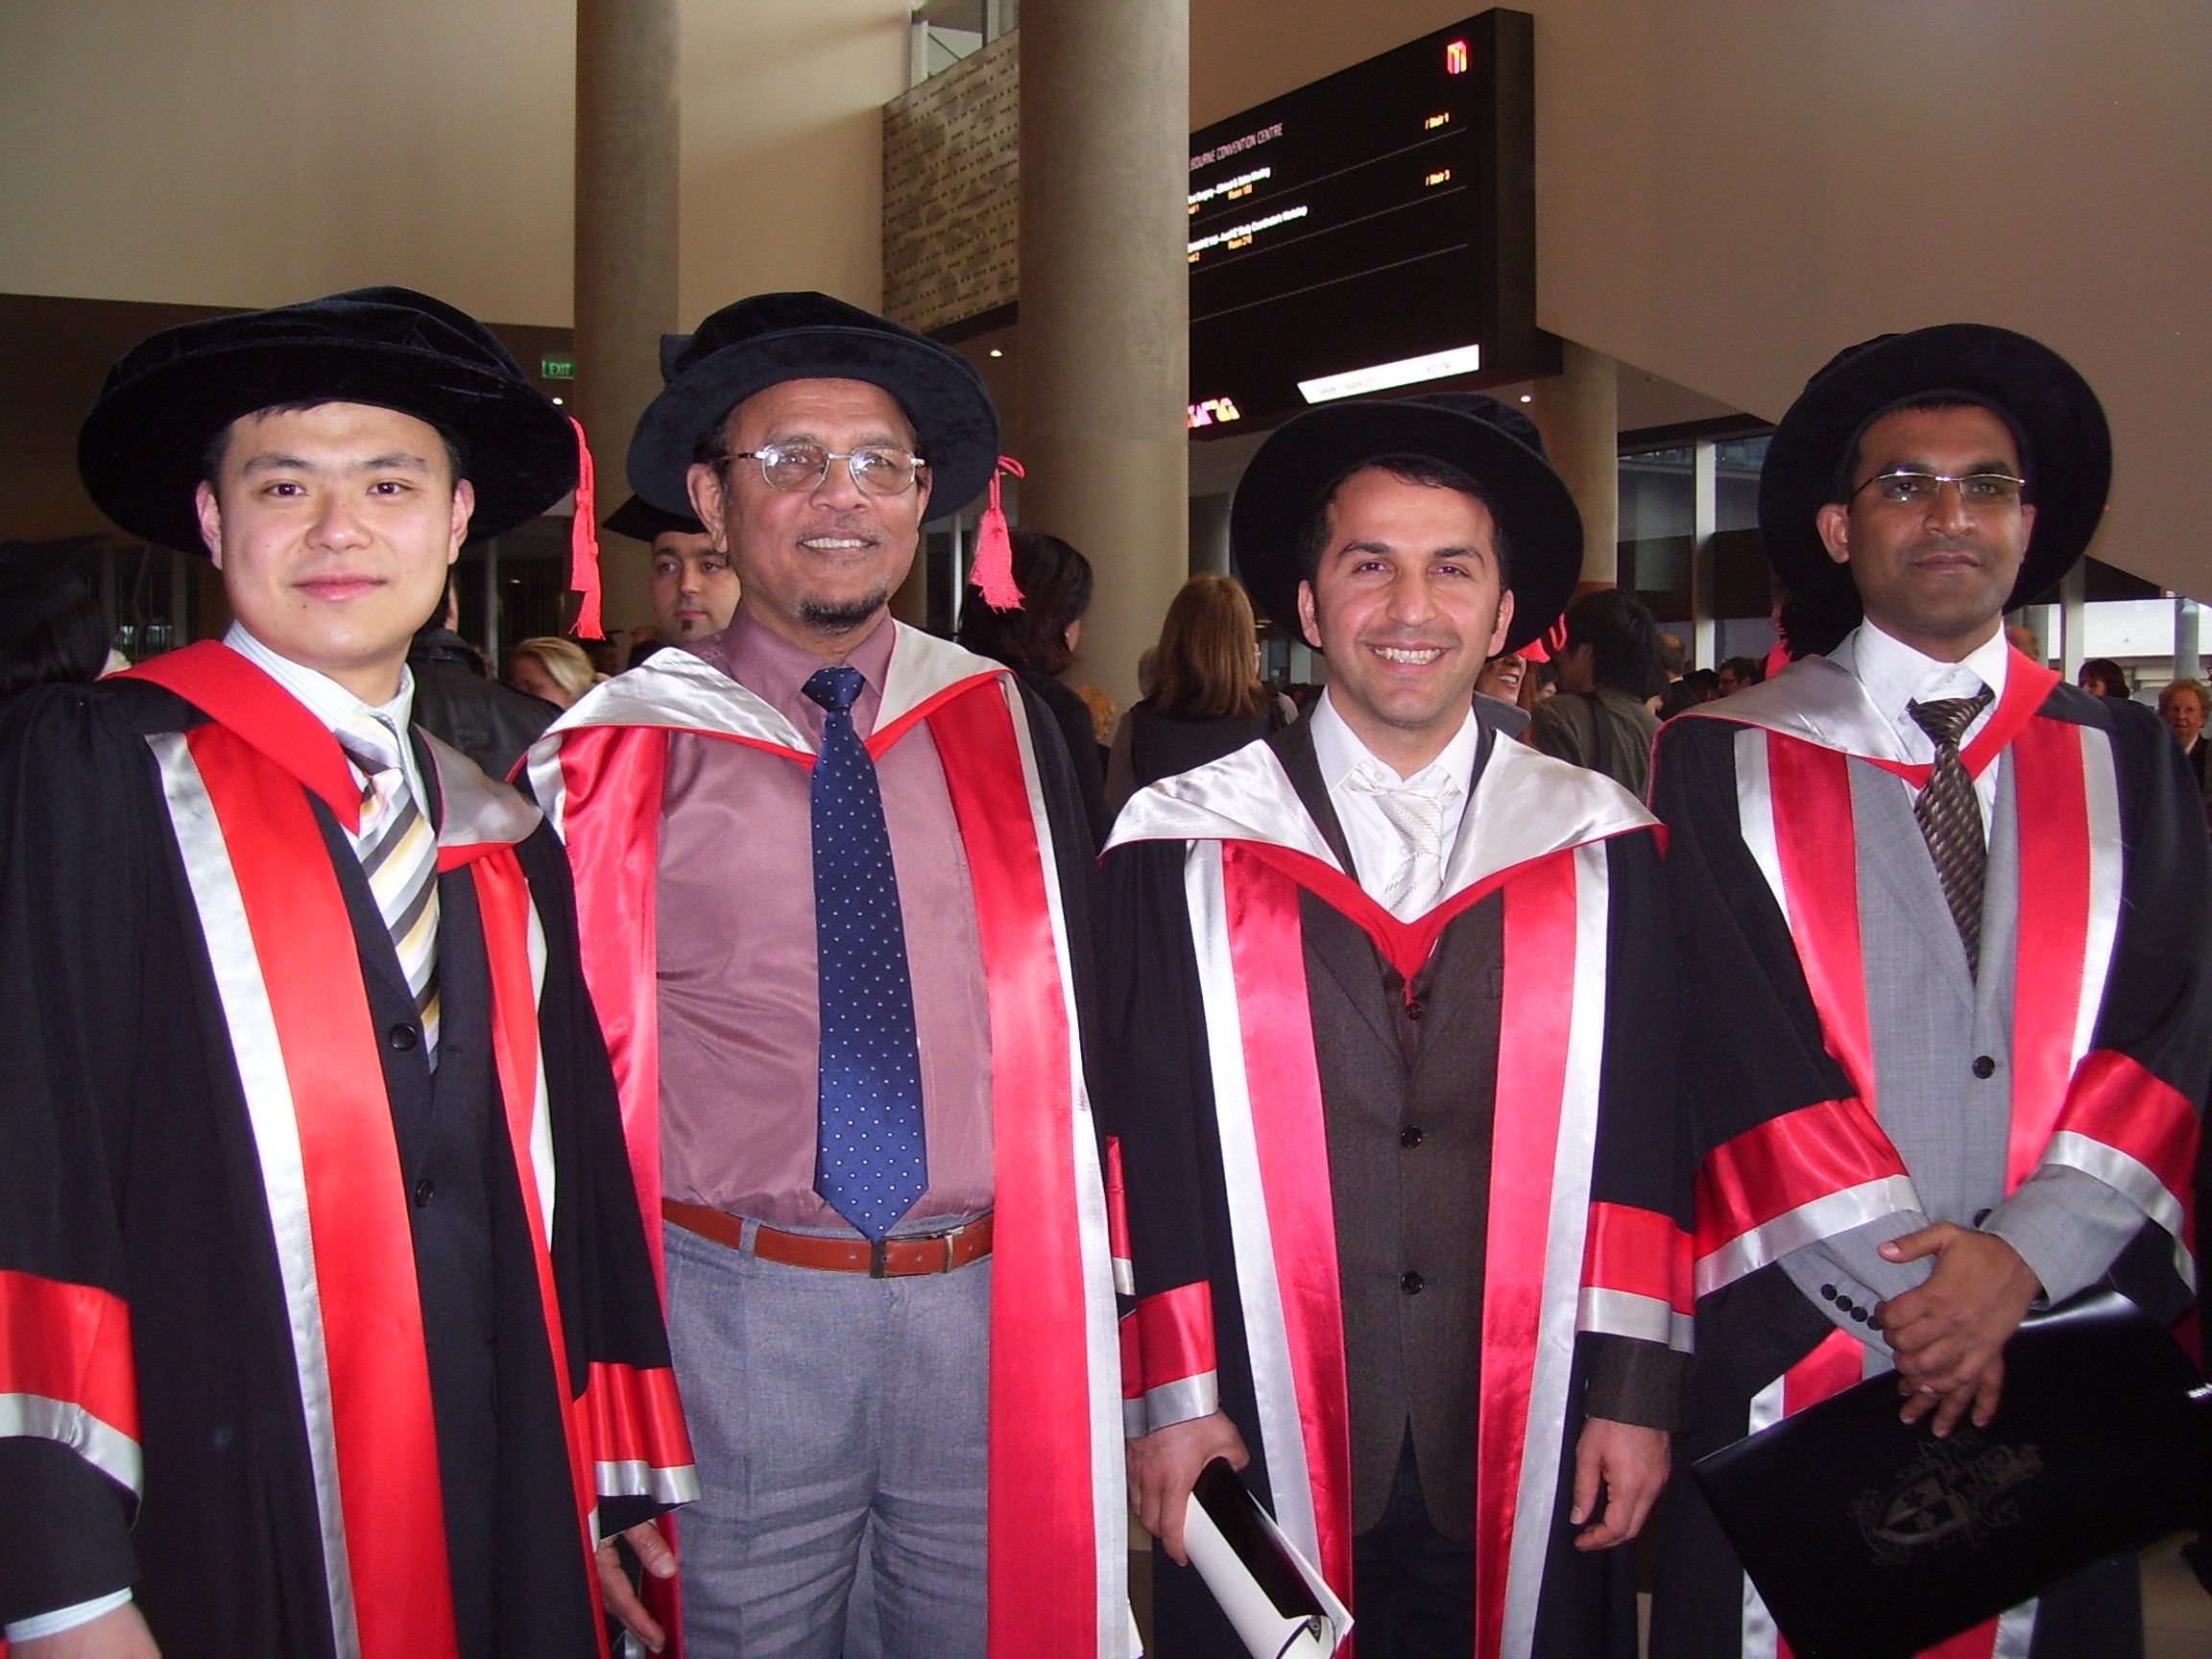 Professor Masood stands second from the left with three of his 2021 PhD graduates. All are wearing robes with the Swinburne colours, red, white and black.